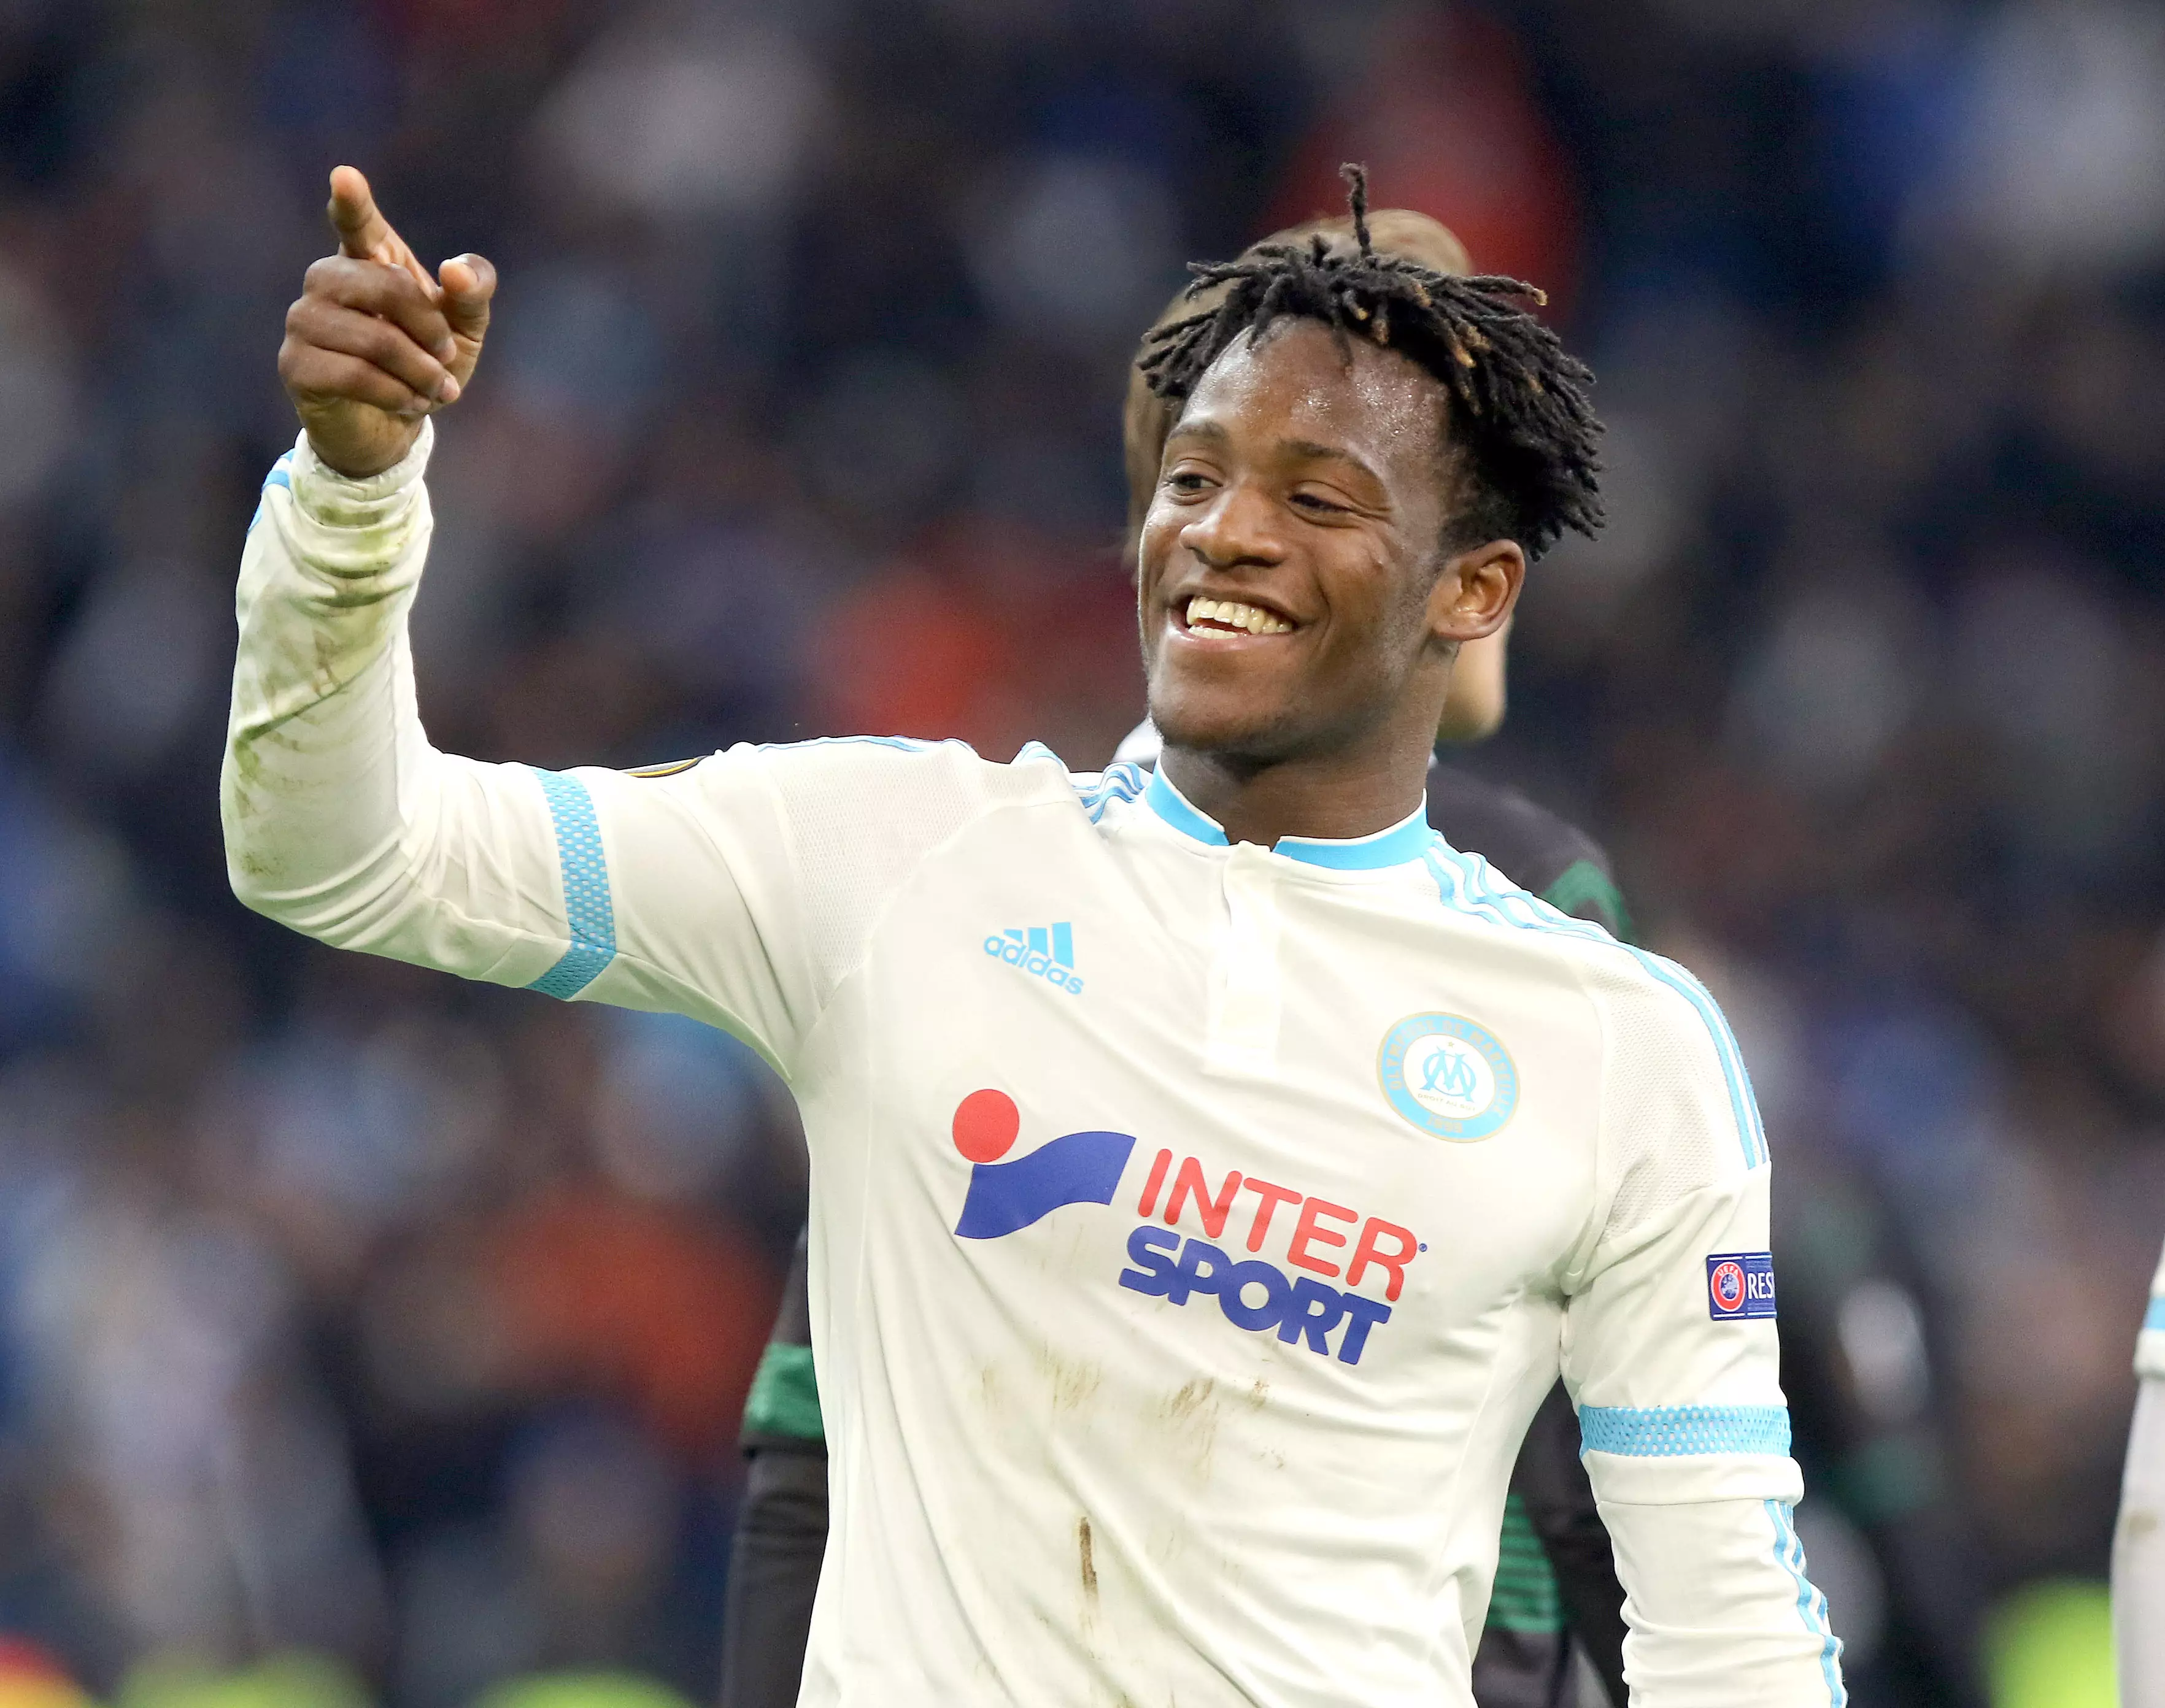 Michy Batshuayi Rejects Crystal Palace For Another Premier League Club